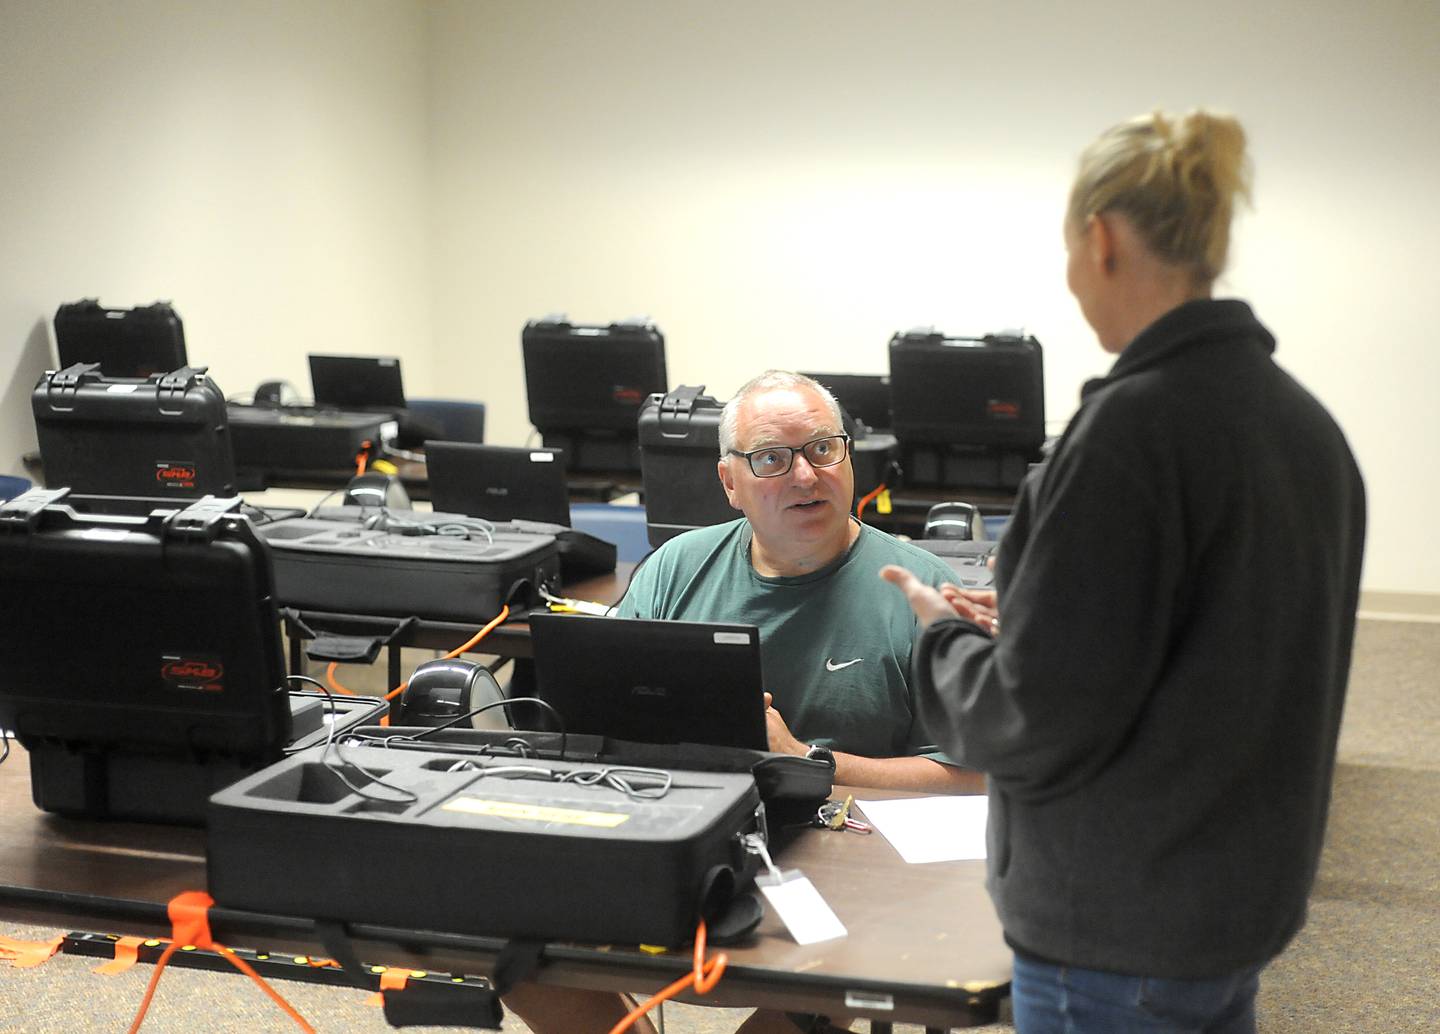 Election judge John Ulaszek, of Cary, talks with Meghan Honea, an election supervisor with McHenry County, as he practices using a voting machine Monday, May 16, 2022, at McHenry County Clerk's Office, 667 Ware Road, in Woodstock, as election judges are trained. Early voting starts for the primary election starts on Thursday, May 19, at the County Clerk's Office.